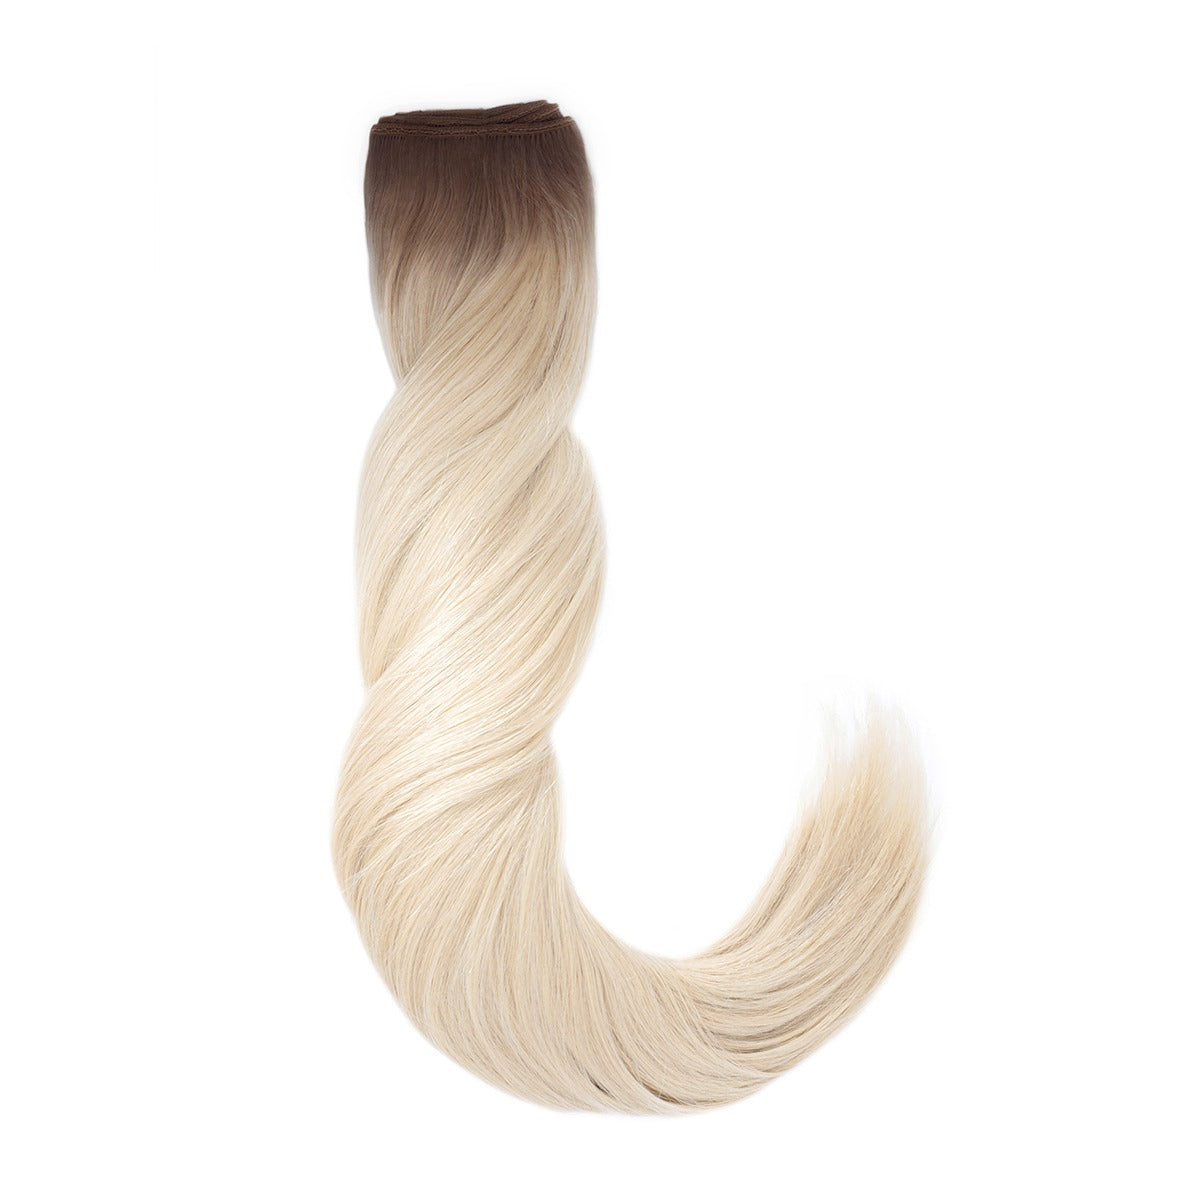 STARDUST Straight Weft R2A/60 (Ash Brown/ Platinum Blonde) Hair Extensions